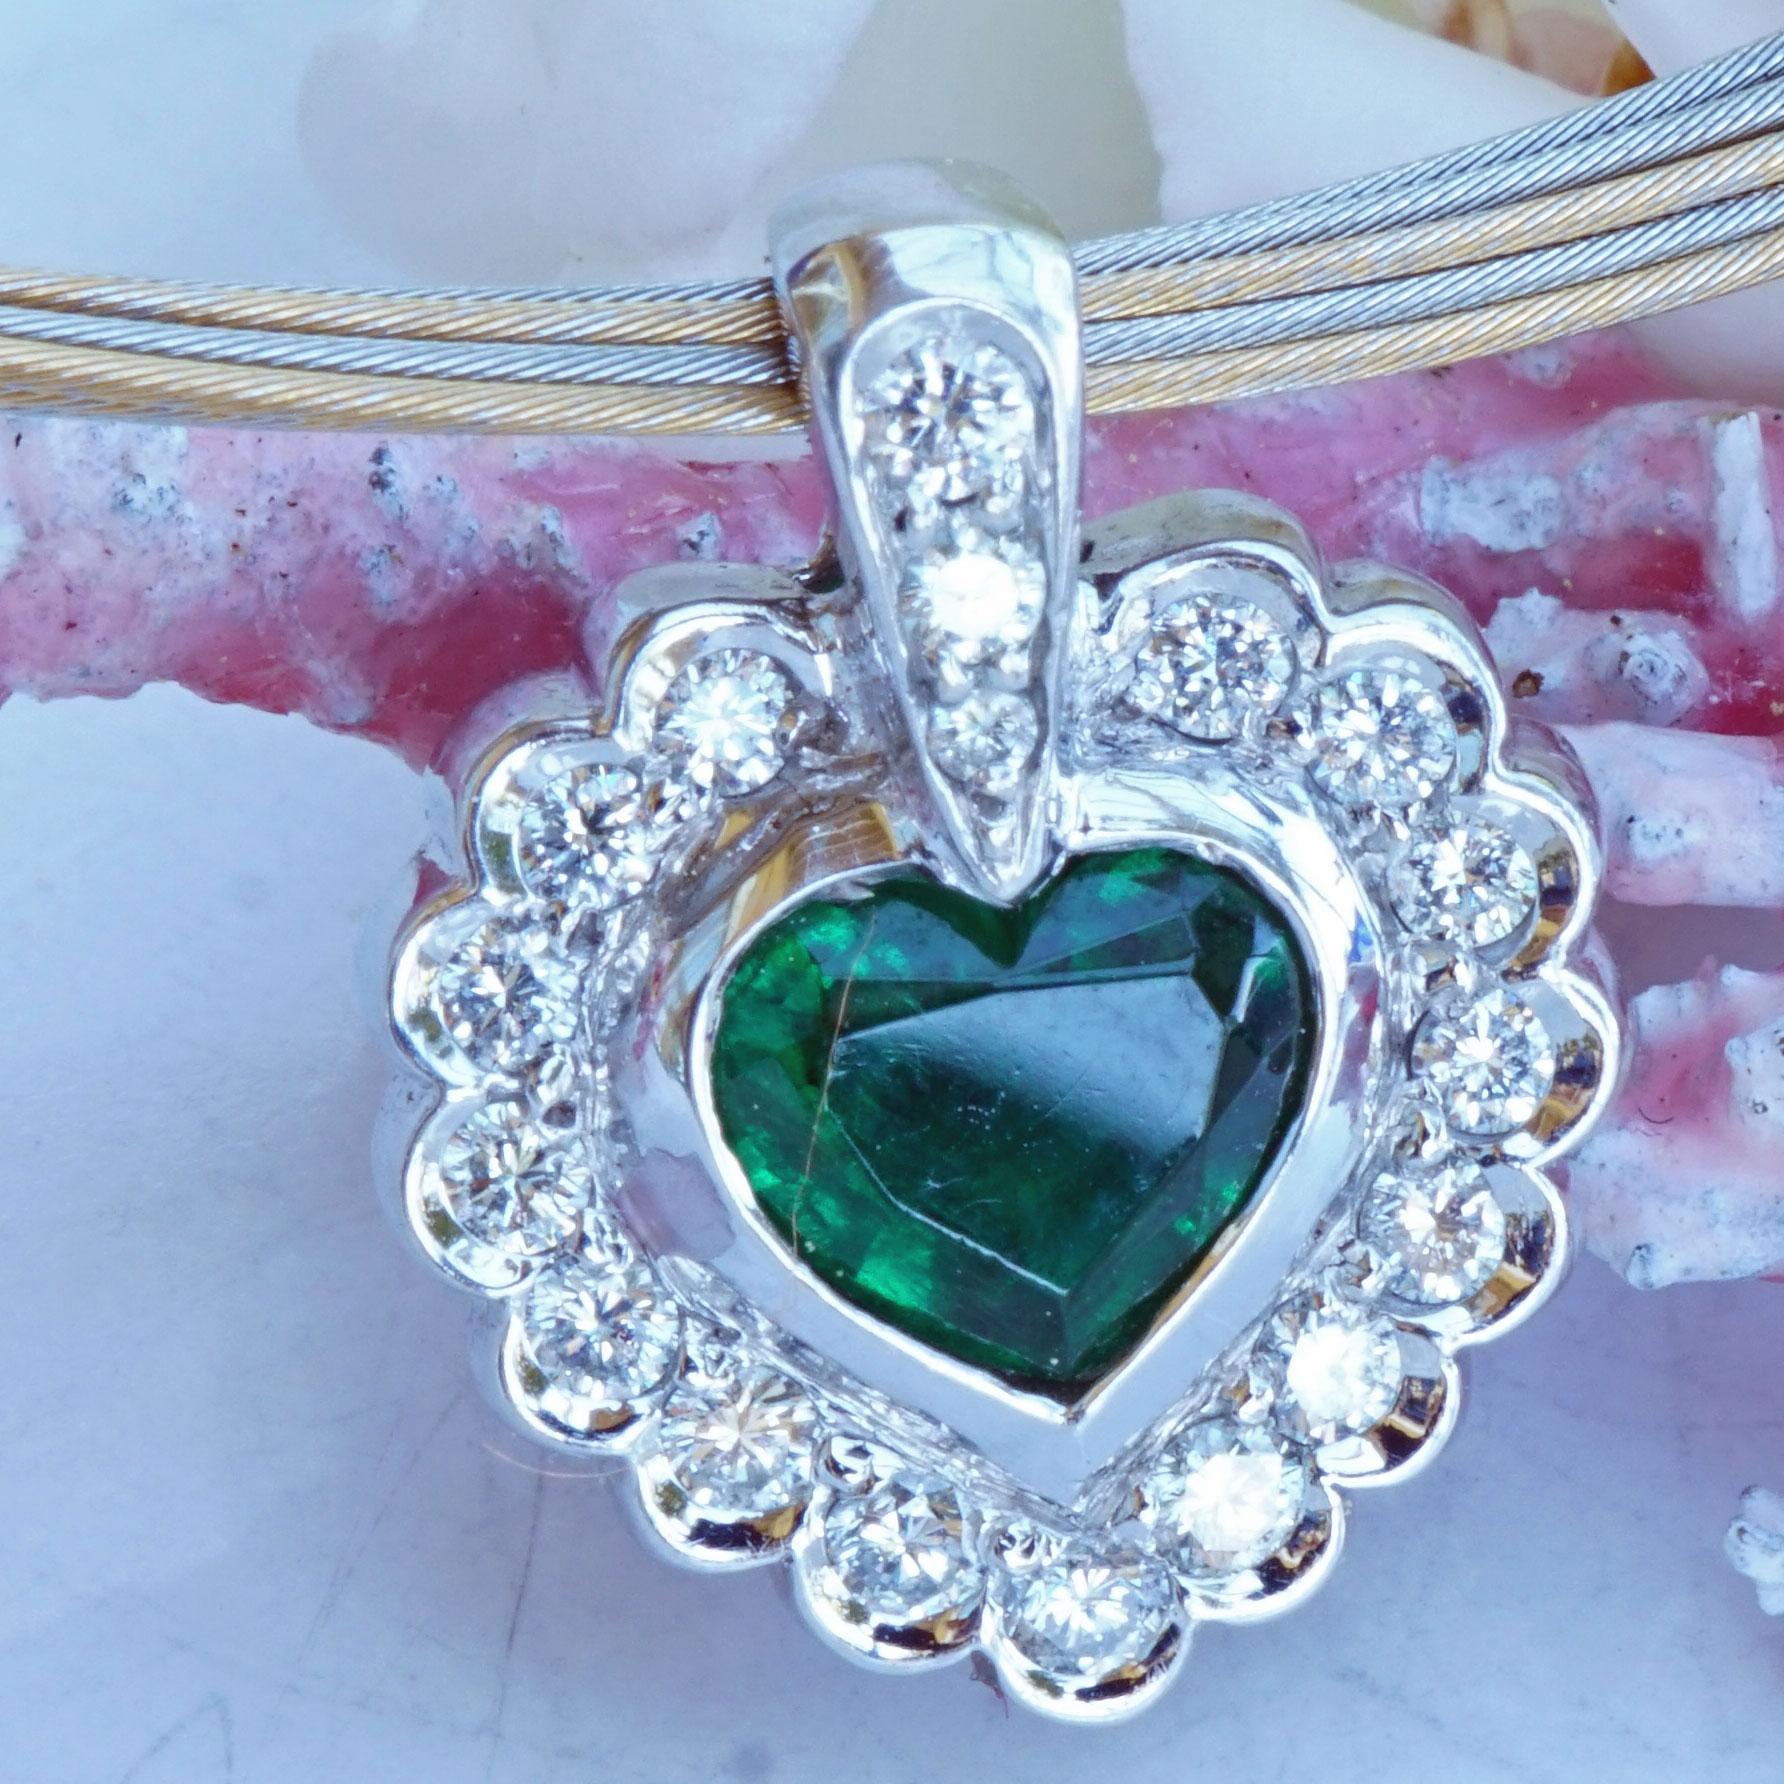 a piece of jewelry for connoisseurs, not everyone is familiar with African emeralds, but not everyone likes the somewhat loud color of the columb. Emeralds, the afrik. Emerald is more reserved but much more profound, here a very fine pure emerald